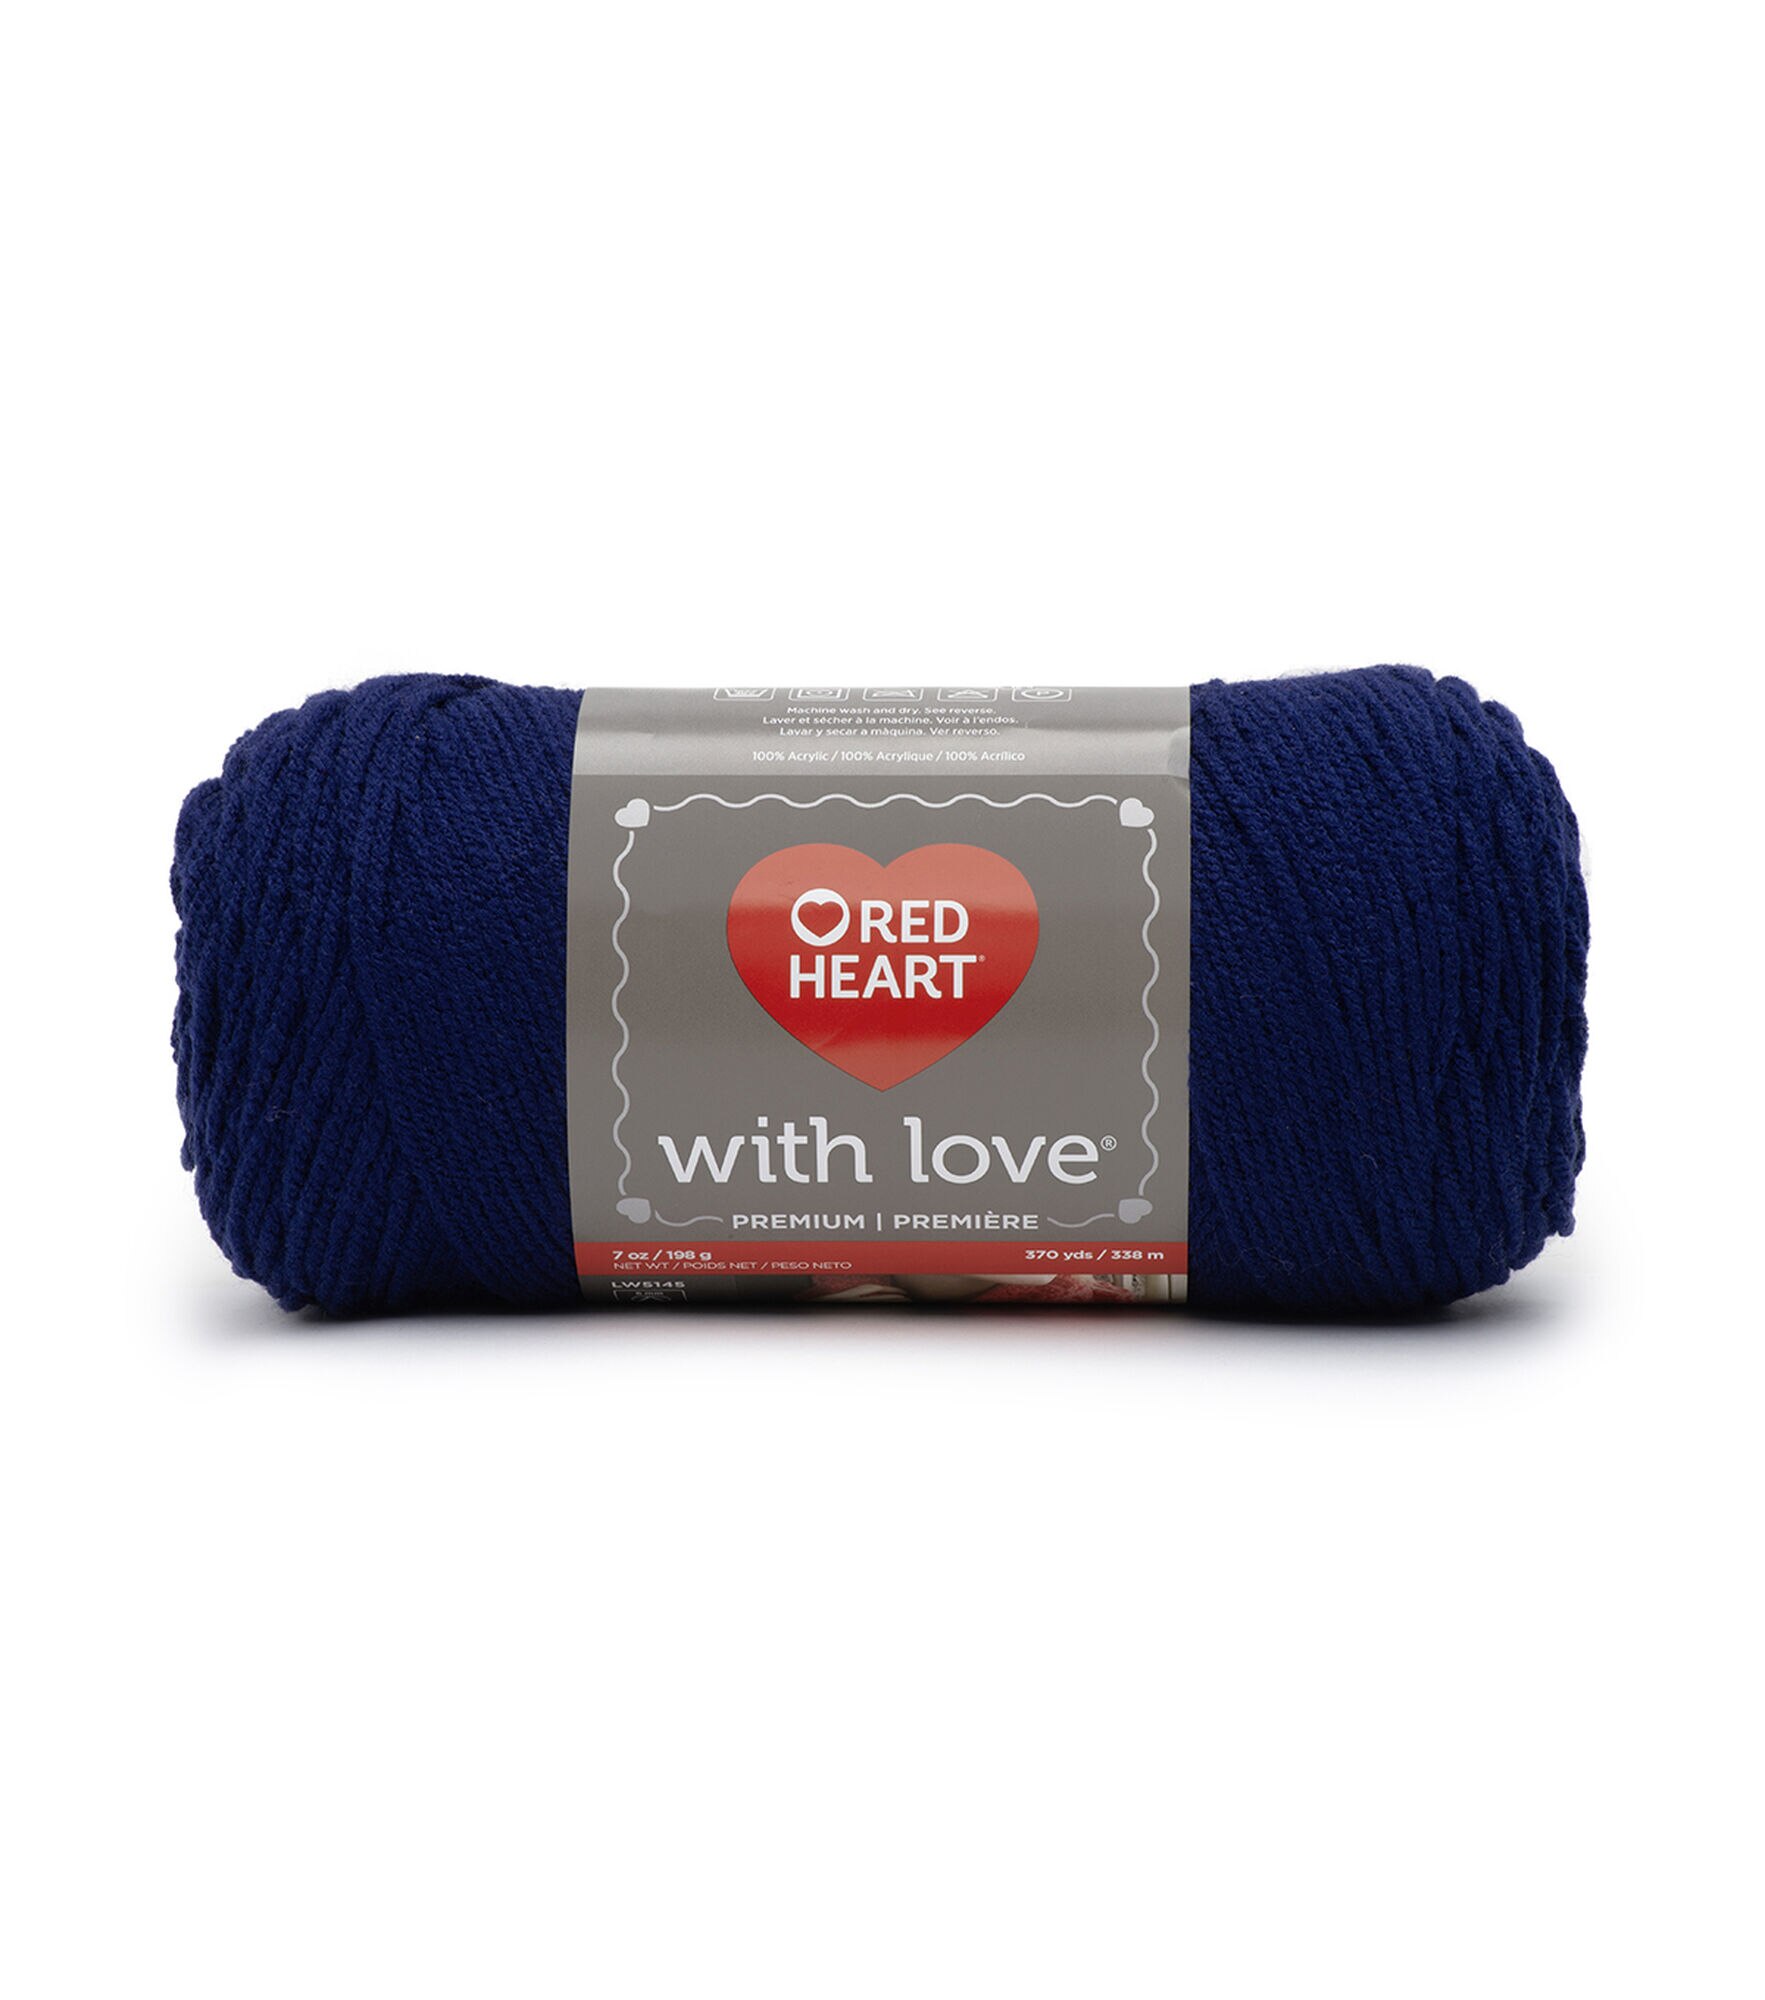 Red Heart with Love Yarn color 1601 Lettuce Skein 4 ply 7 oz. 370